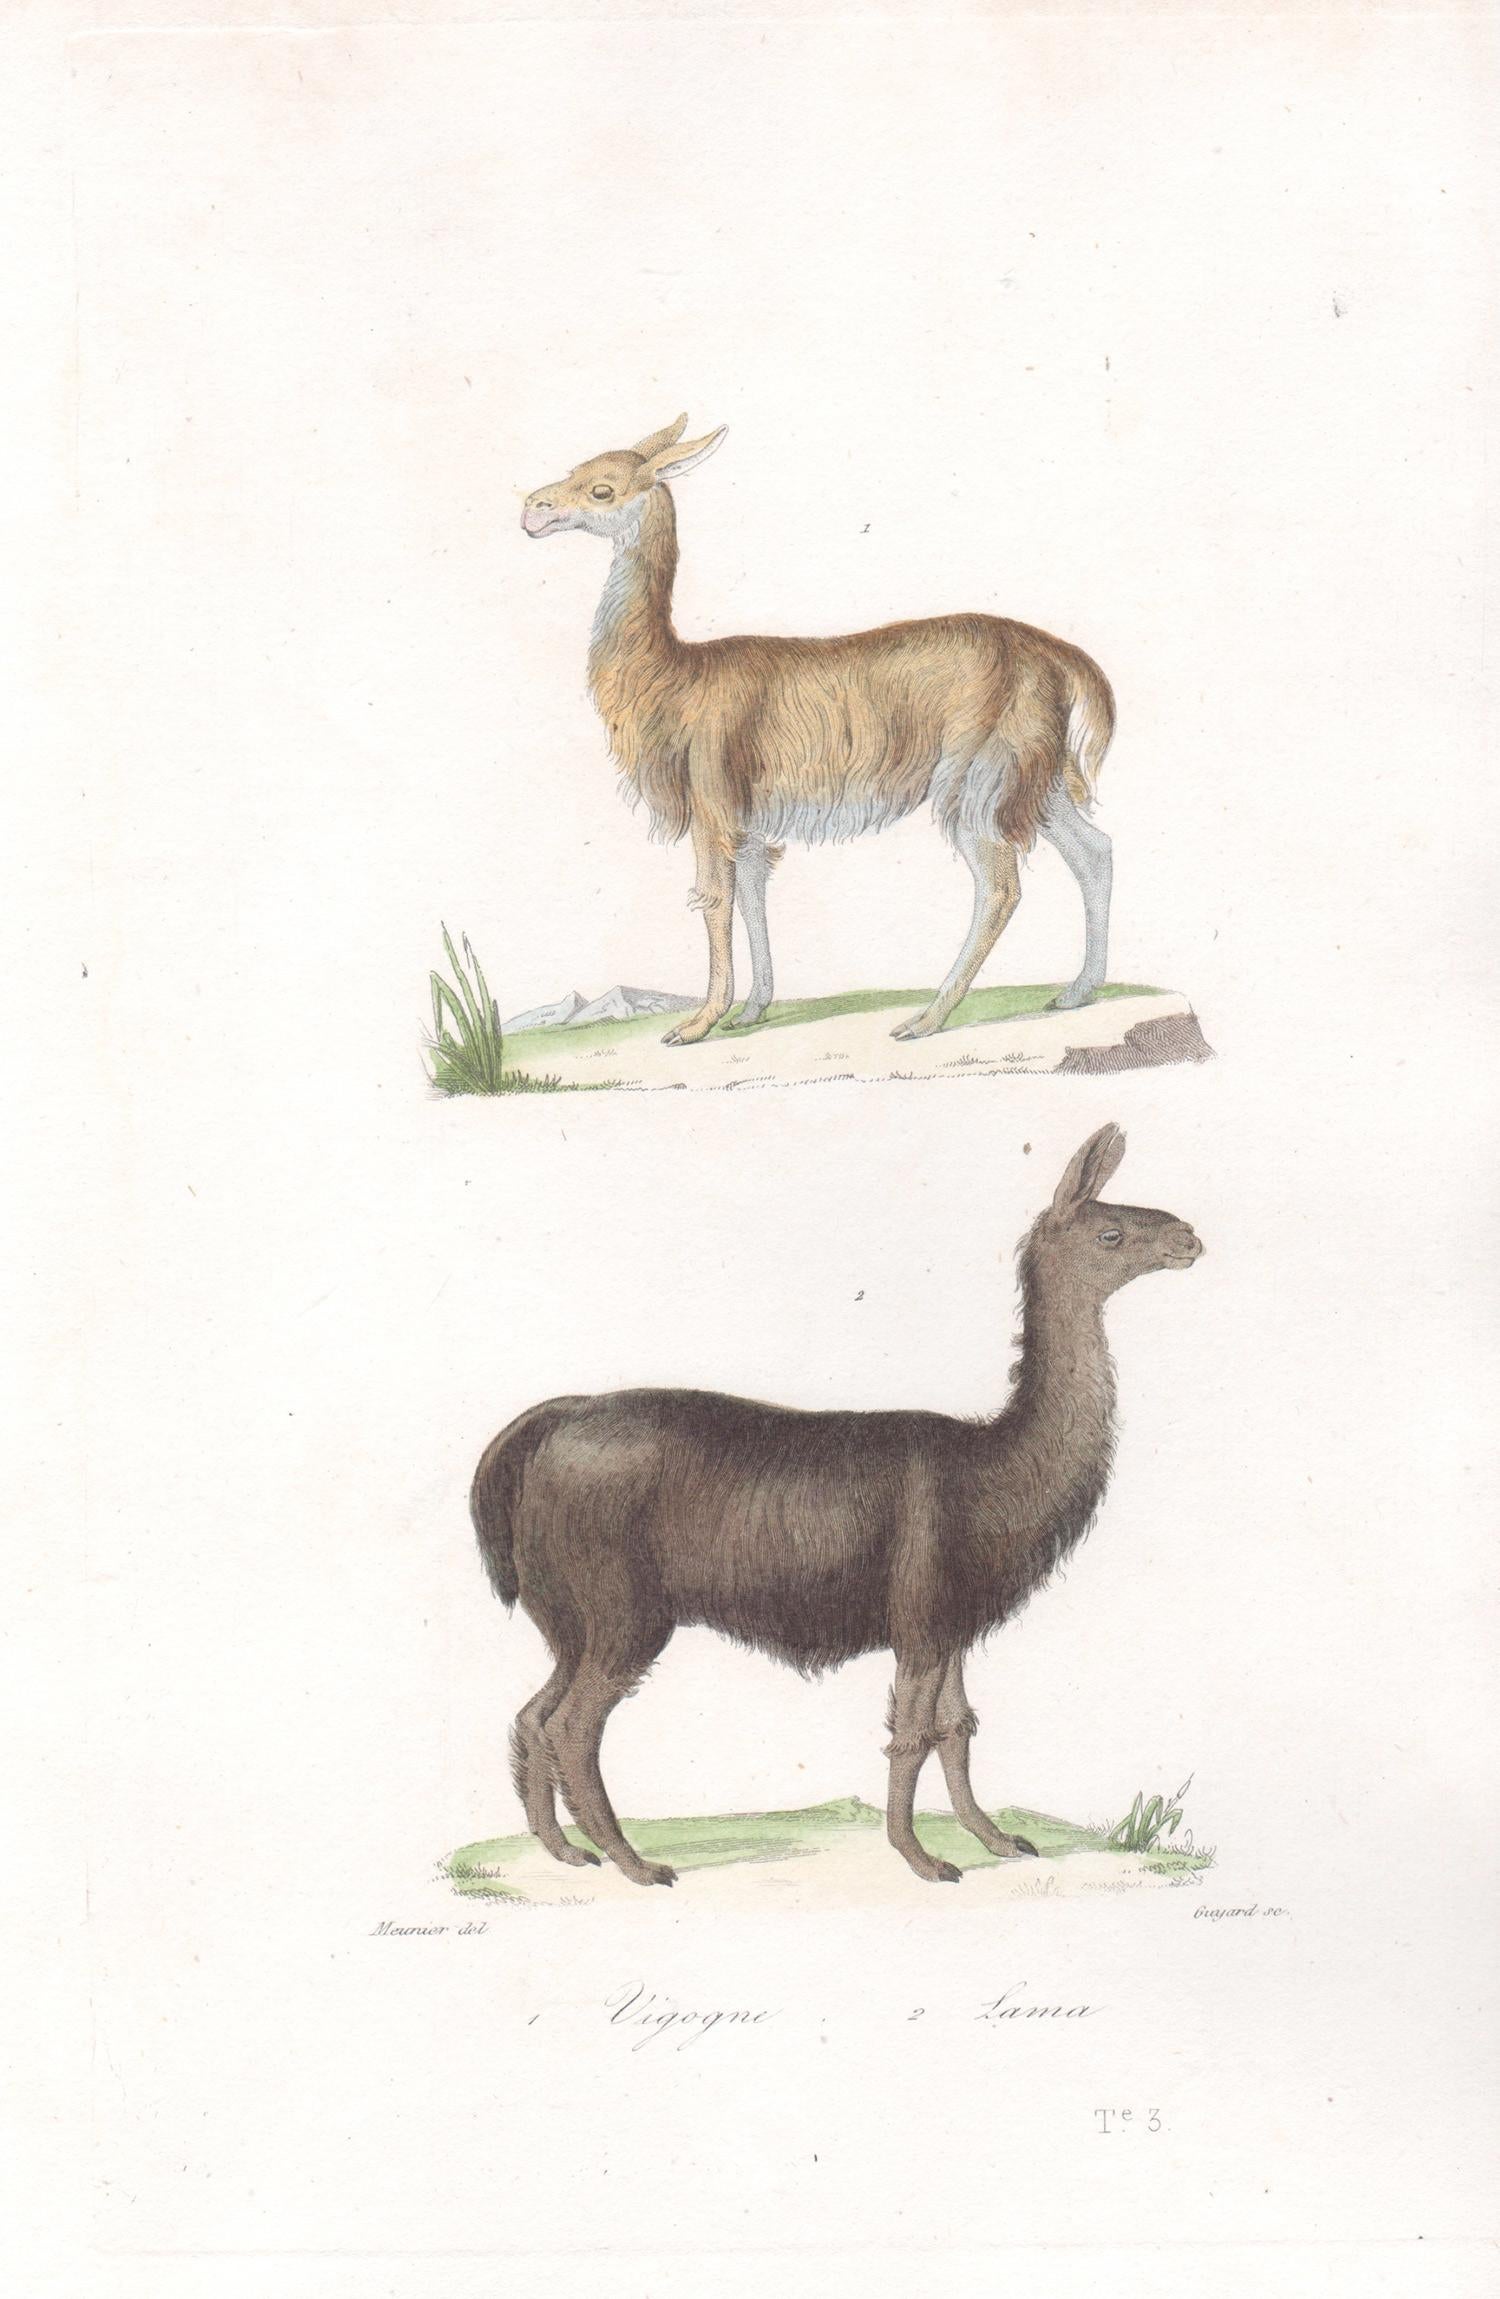 Unknown Animal Print - Vicuna and Llama, mid 19th French century animal engraving